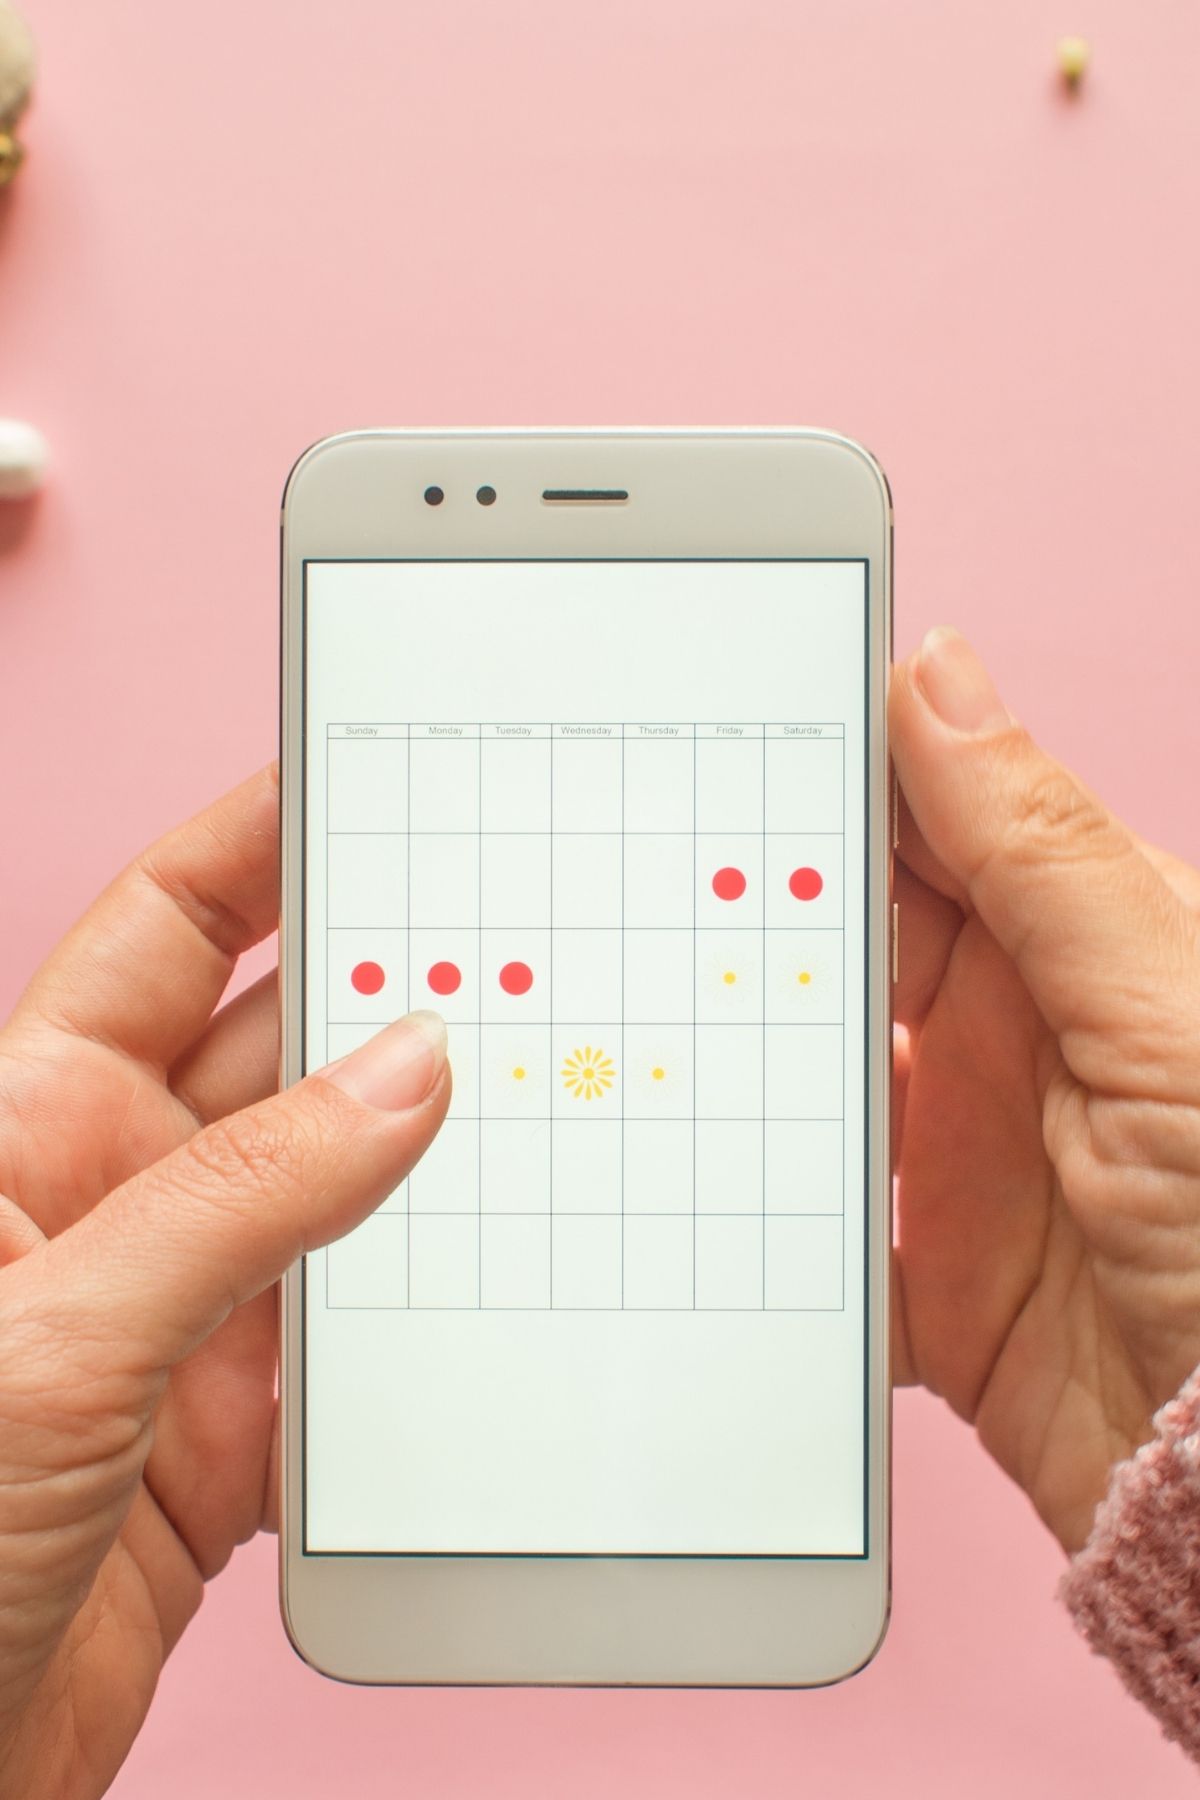 Woman holds phone with an app for tracking menstrual cycles using a calendar and dots.